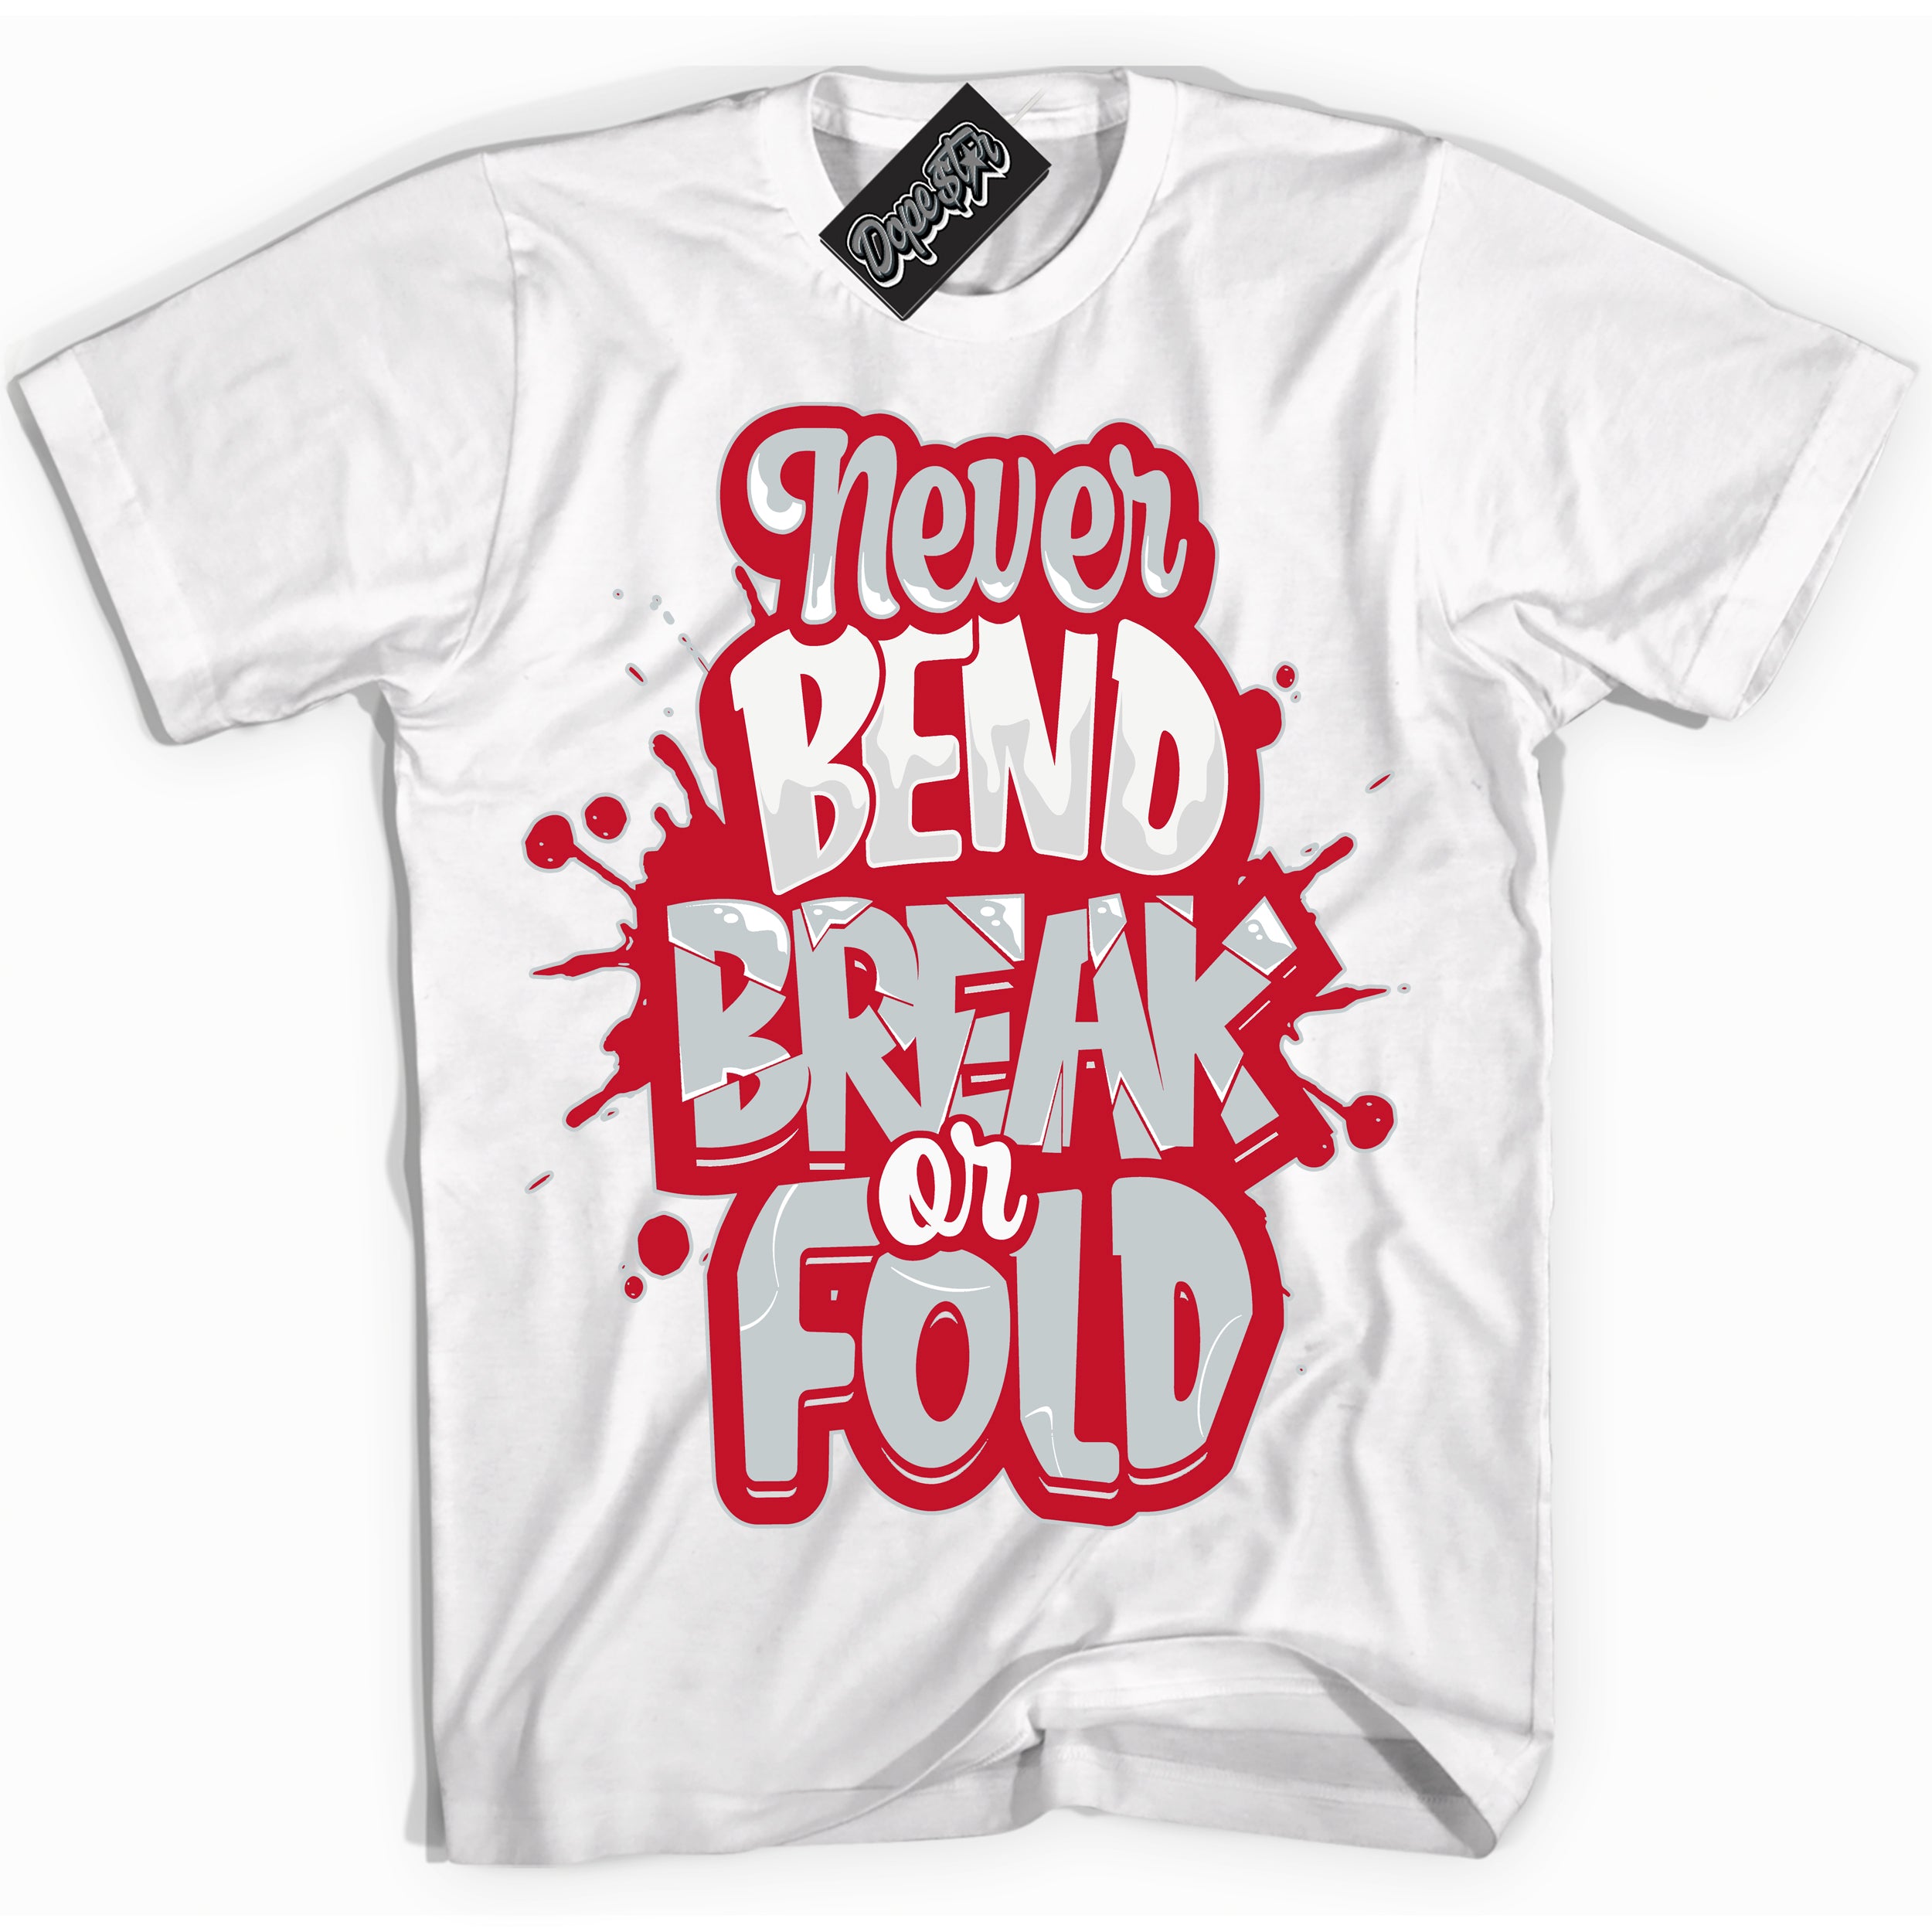 Cool White Shirt with “ Never Bend Break Or Fold” design that perfectly matches Reverse Ultraman Sneakers.